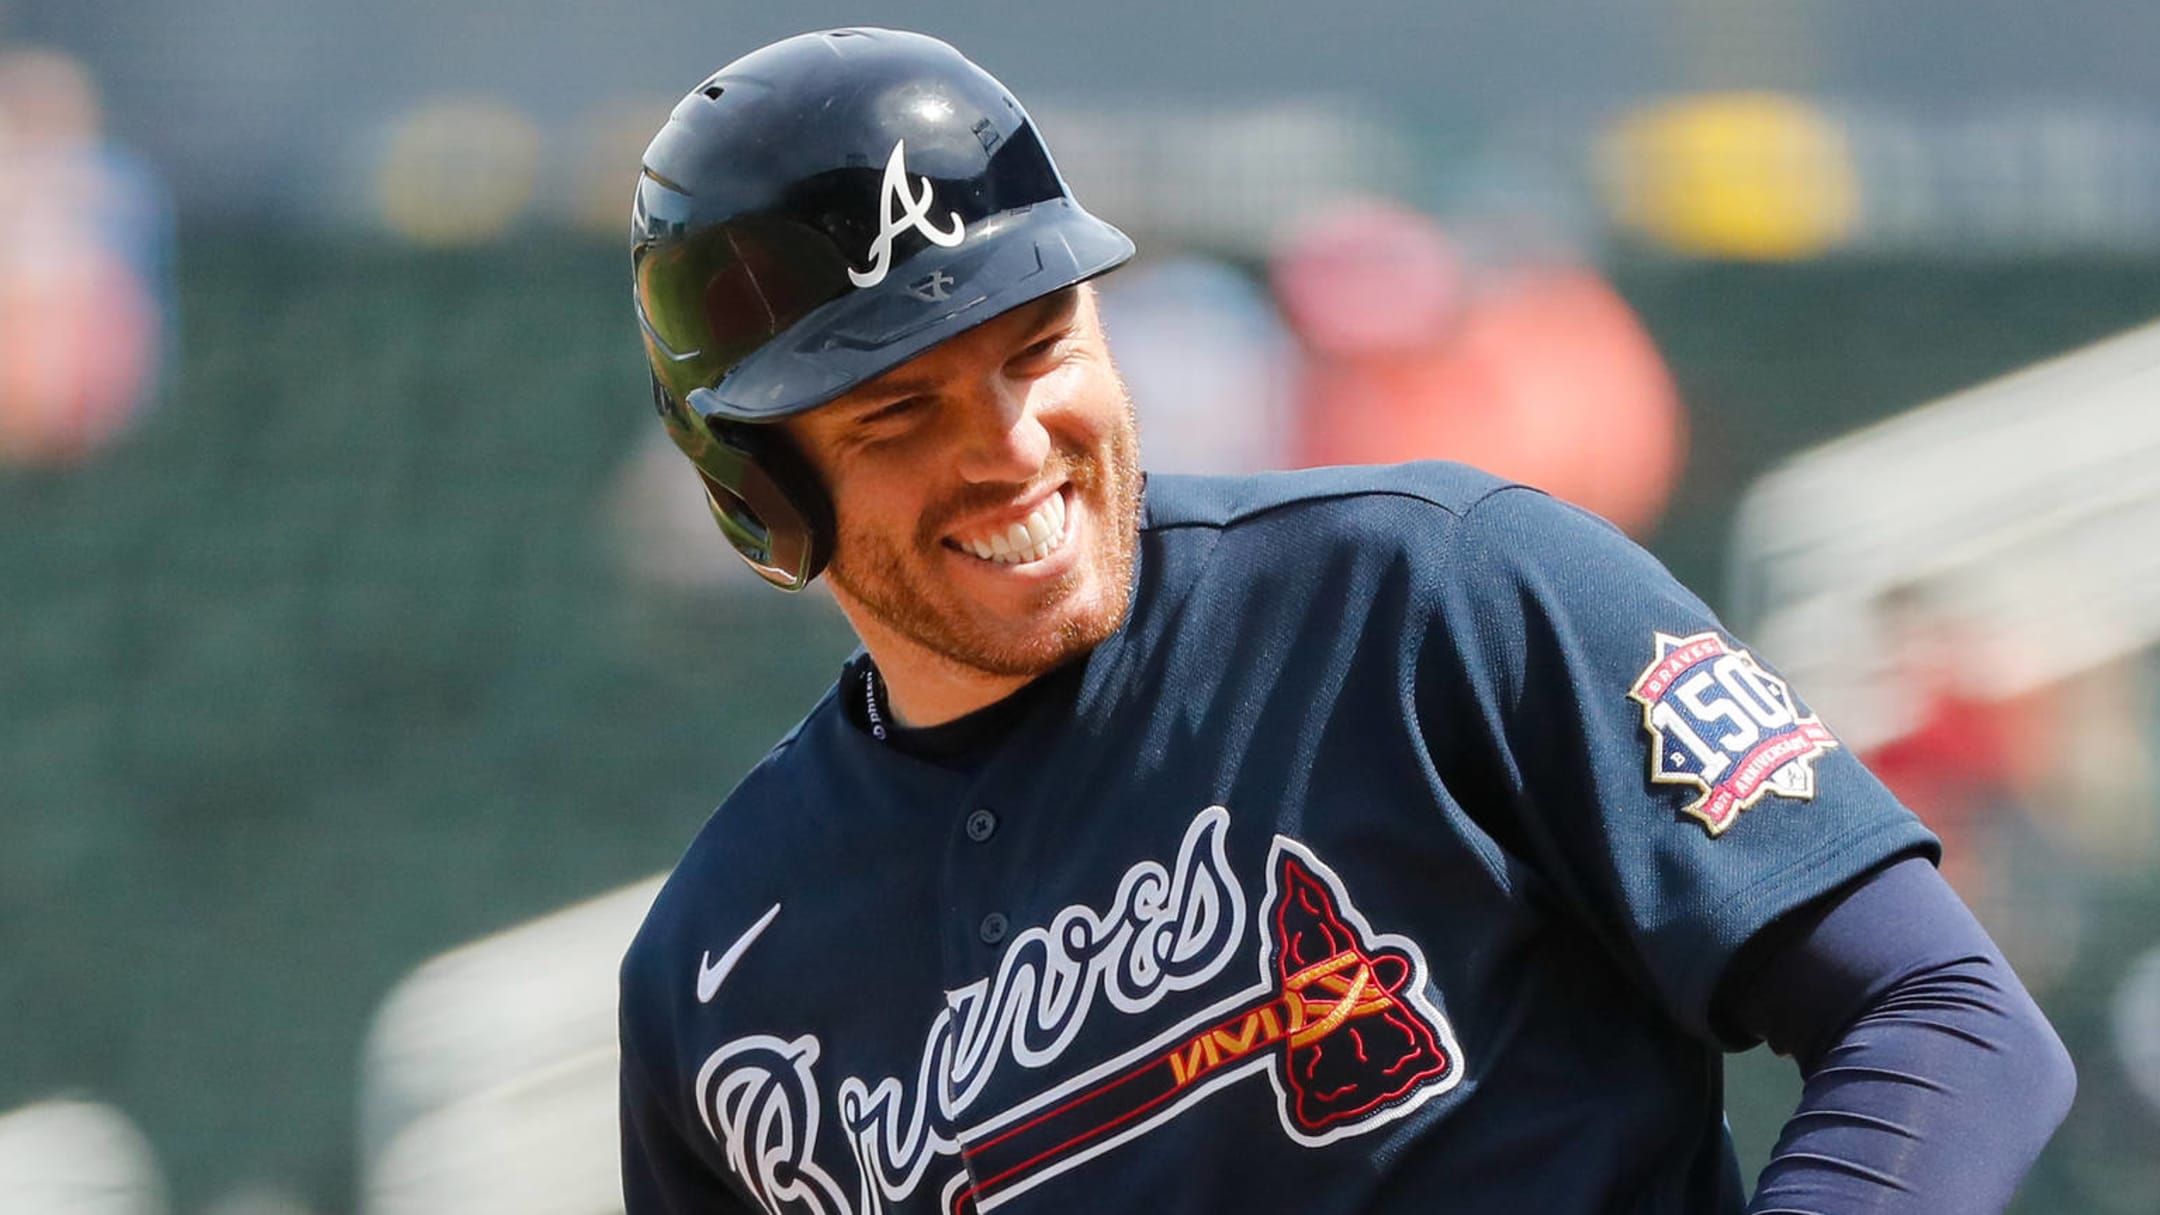 Baseball player Freddie Freeman surprises a young Phillies fan who